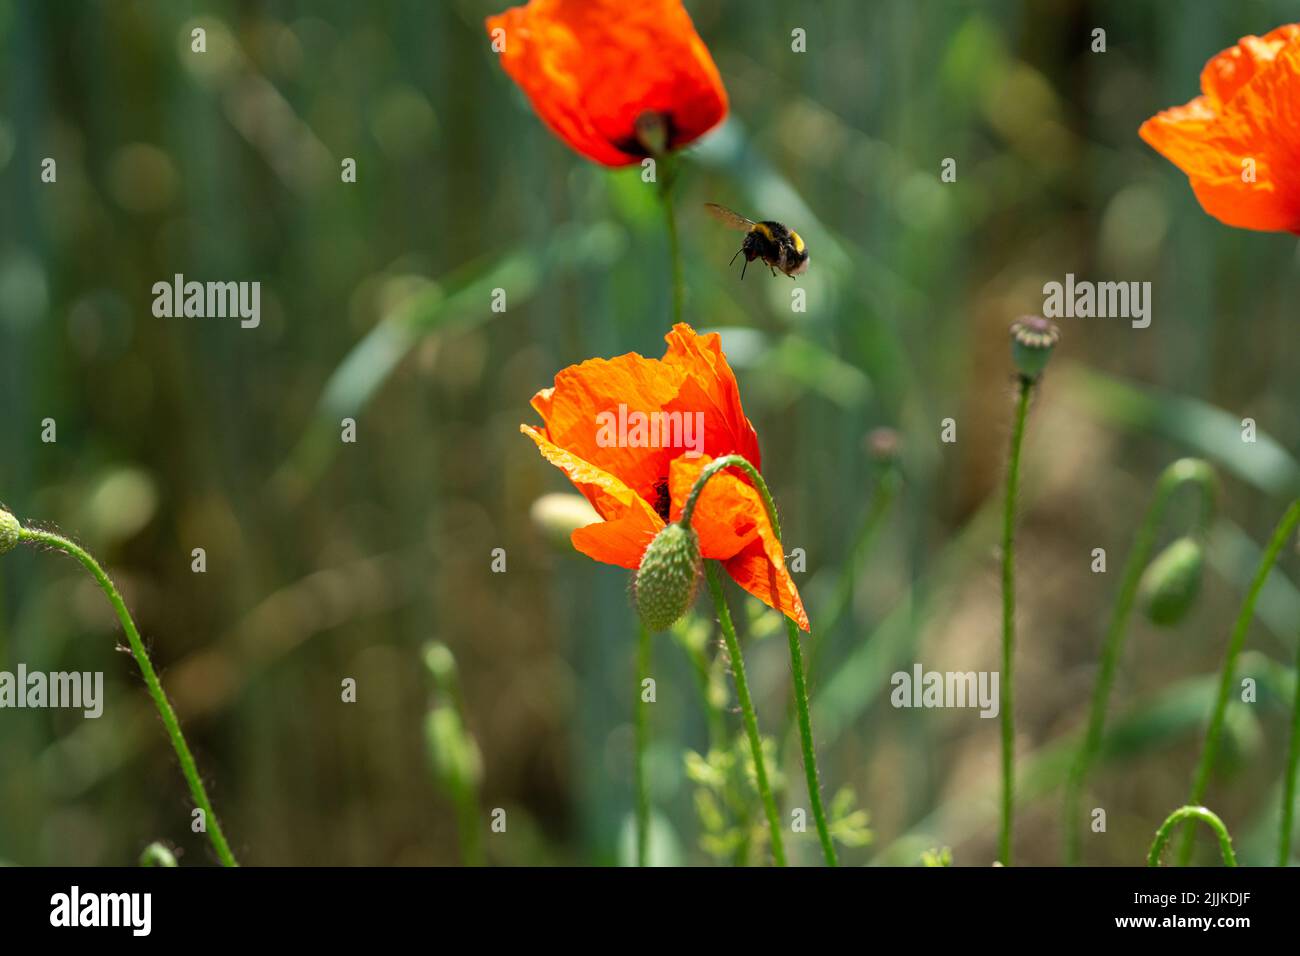 A beautiful view of a bee pollinating on red poppy flowers in a field Stock Photo